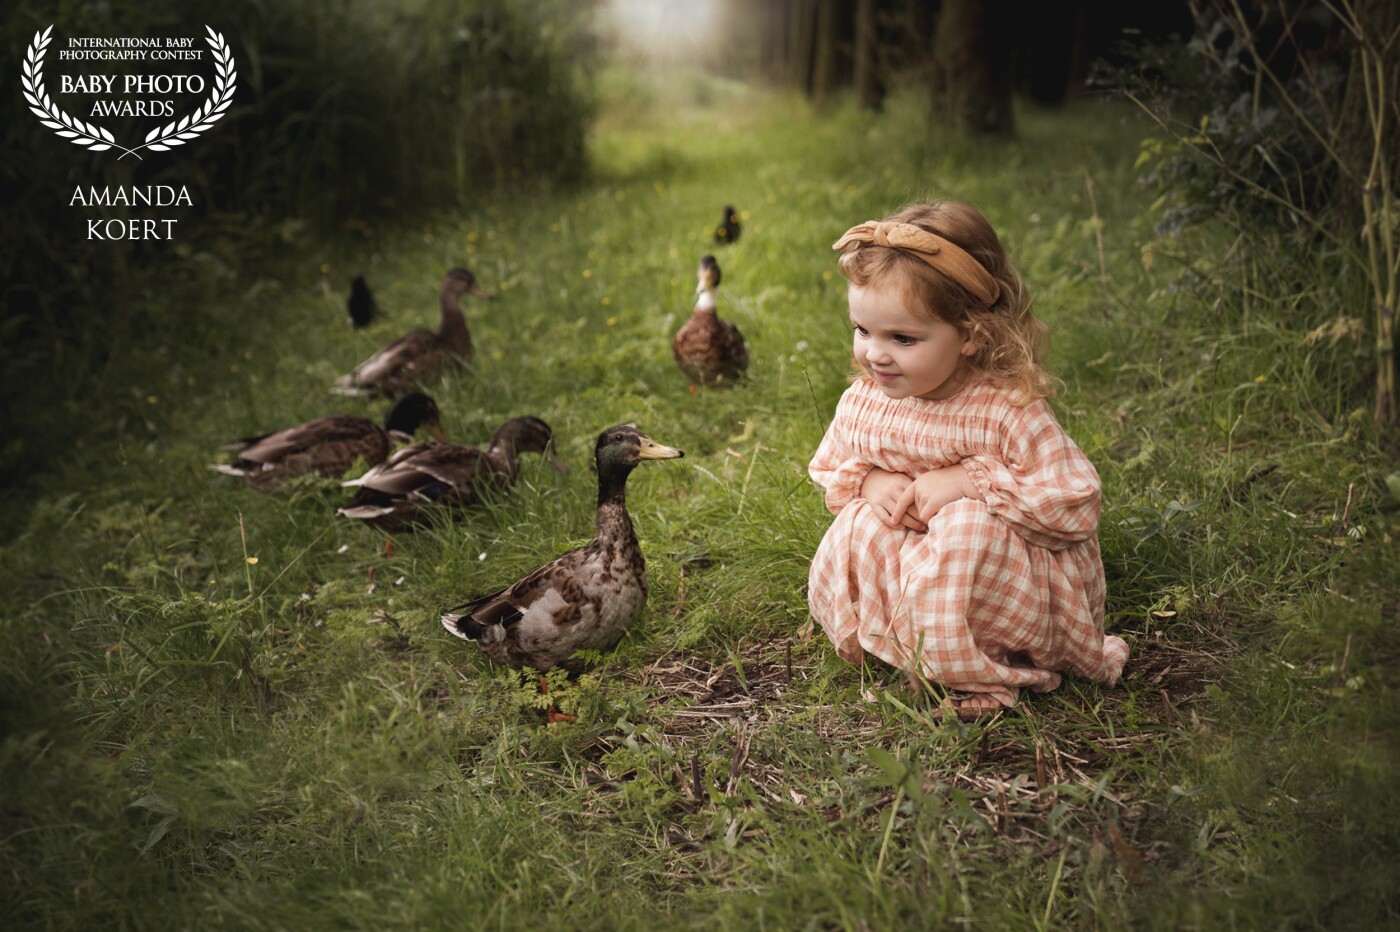 Every day we walk past the ducks, chickens, deer and all other animals. For me, this is such a precious photo because it is my own daughter near our house in her favorite spot.